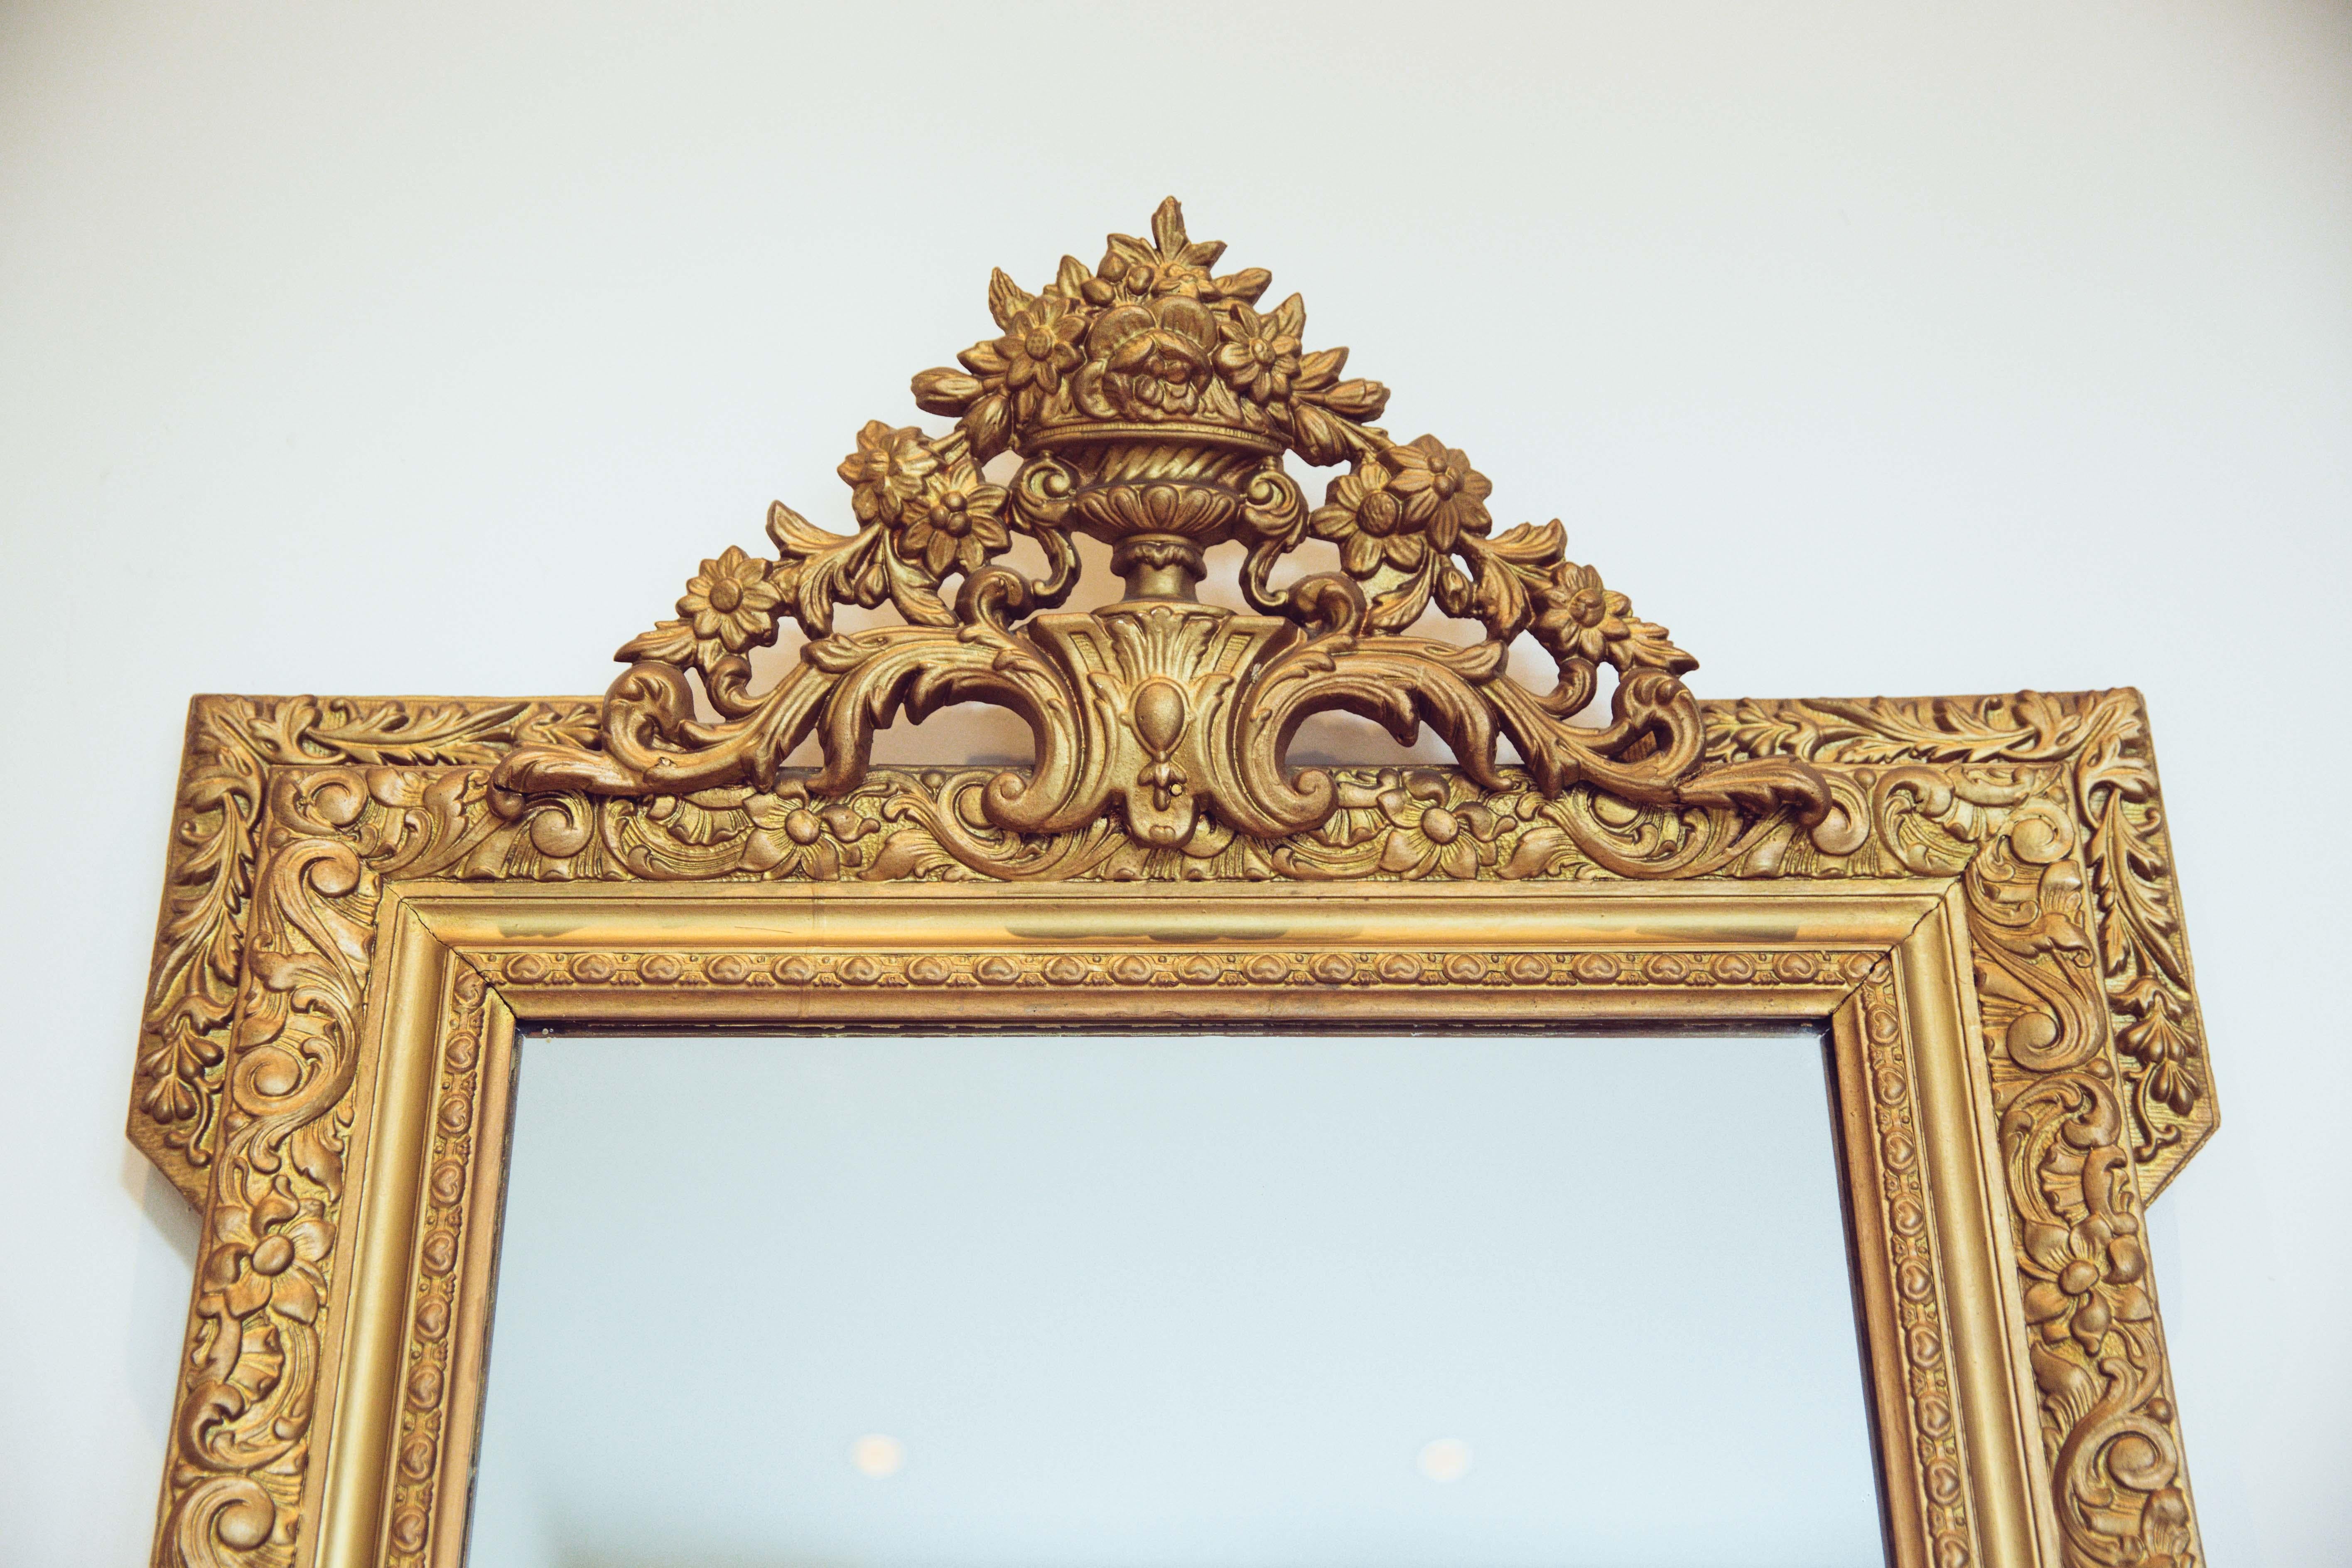 Louis XVI 19th Century French Carved Gilded Wood Mirror with Urn Motif Crest For Sale